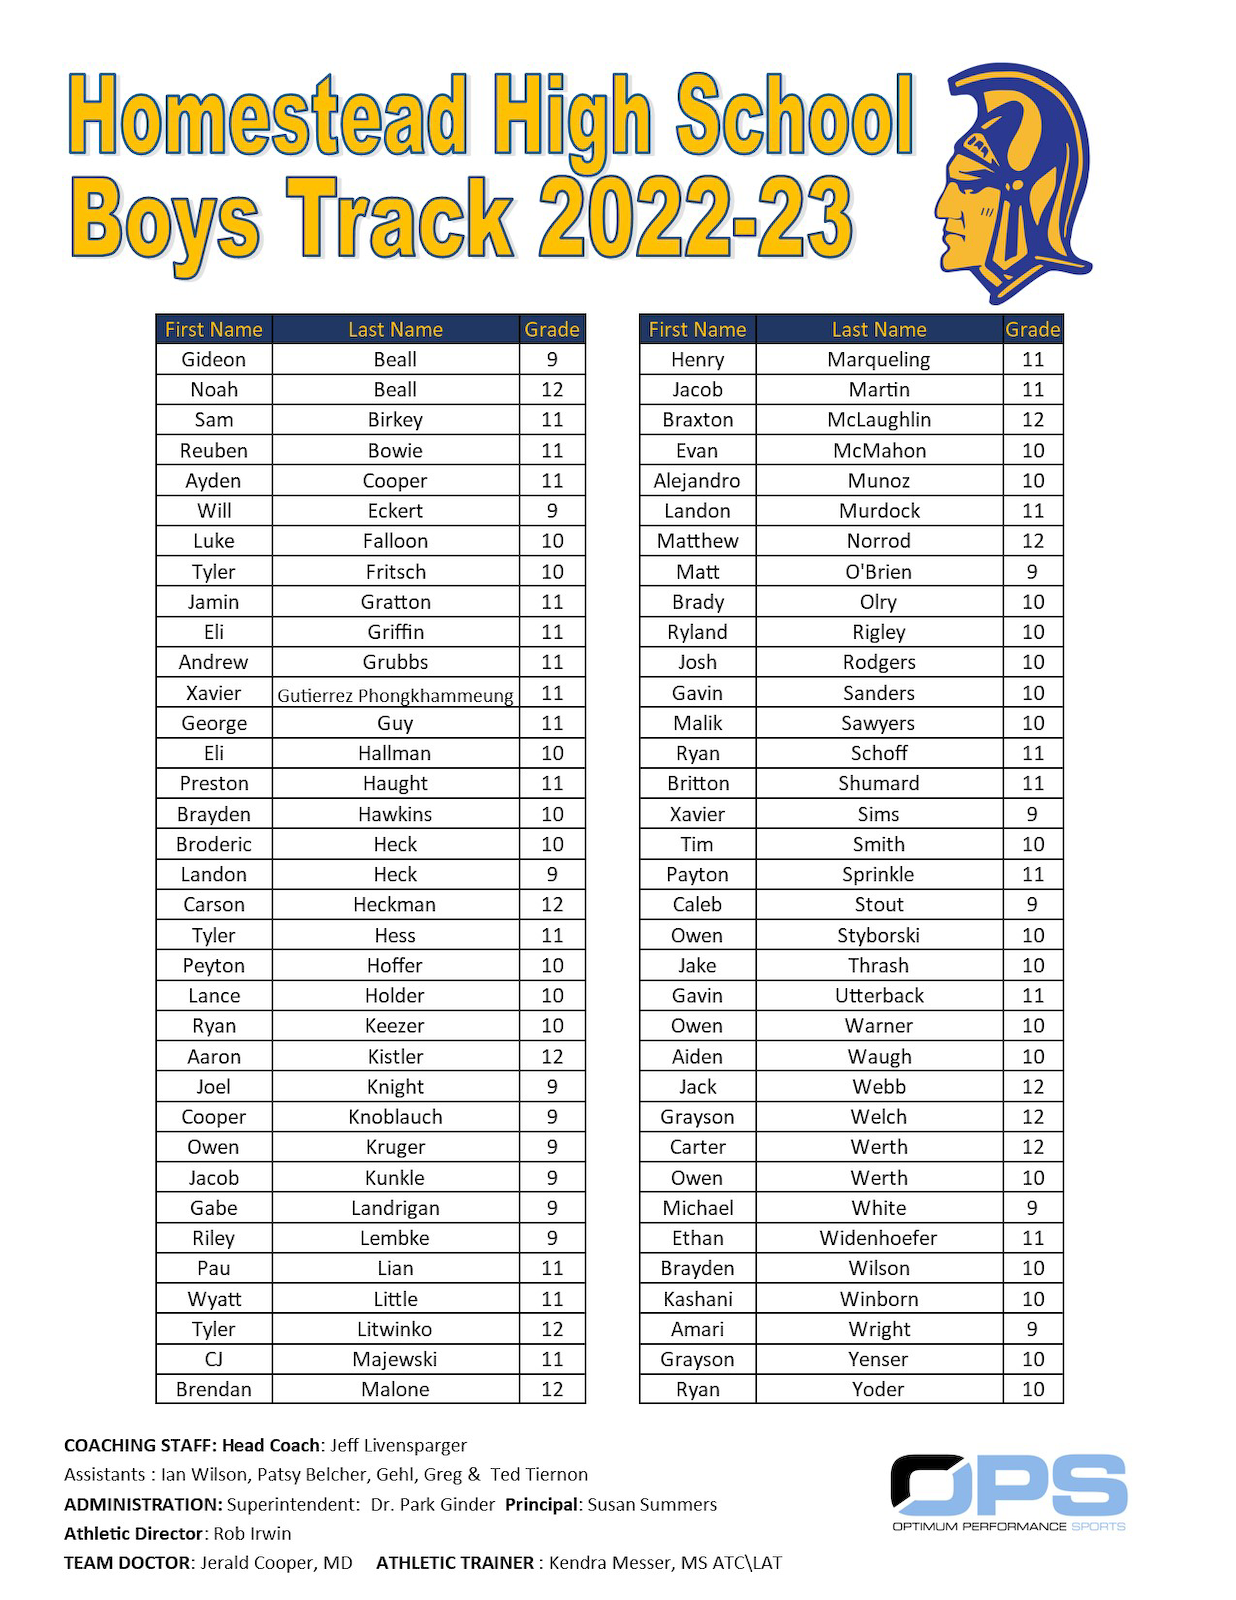 Homestead Boys Track Roster 2023.png